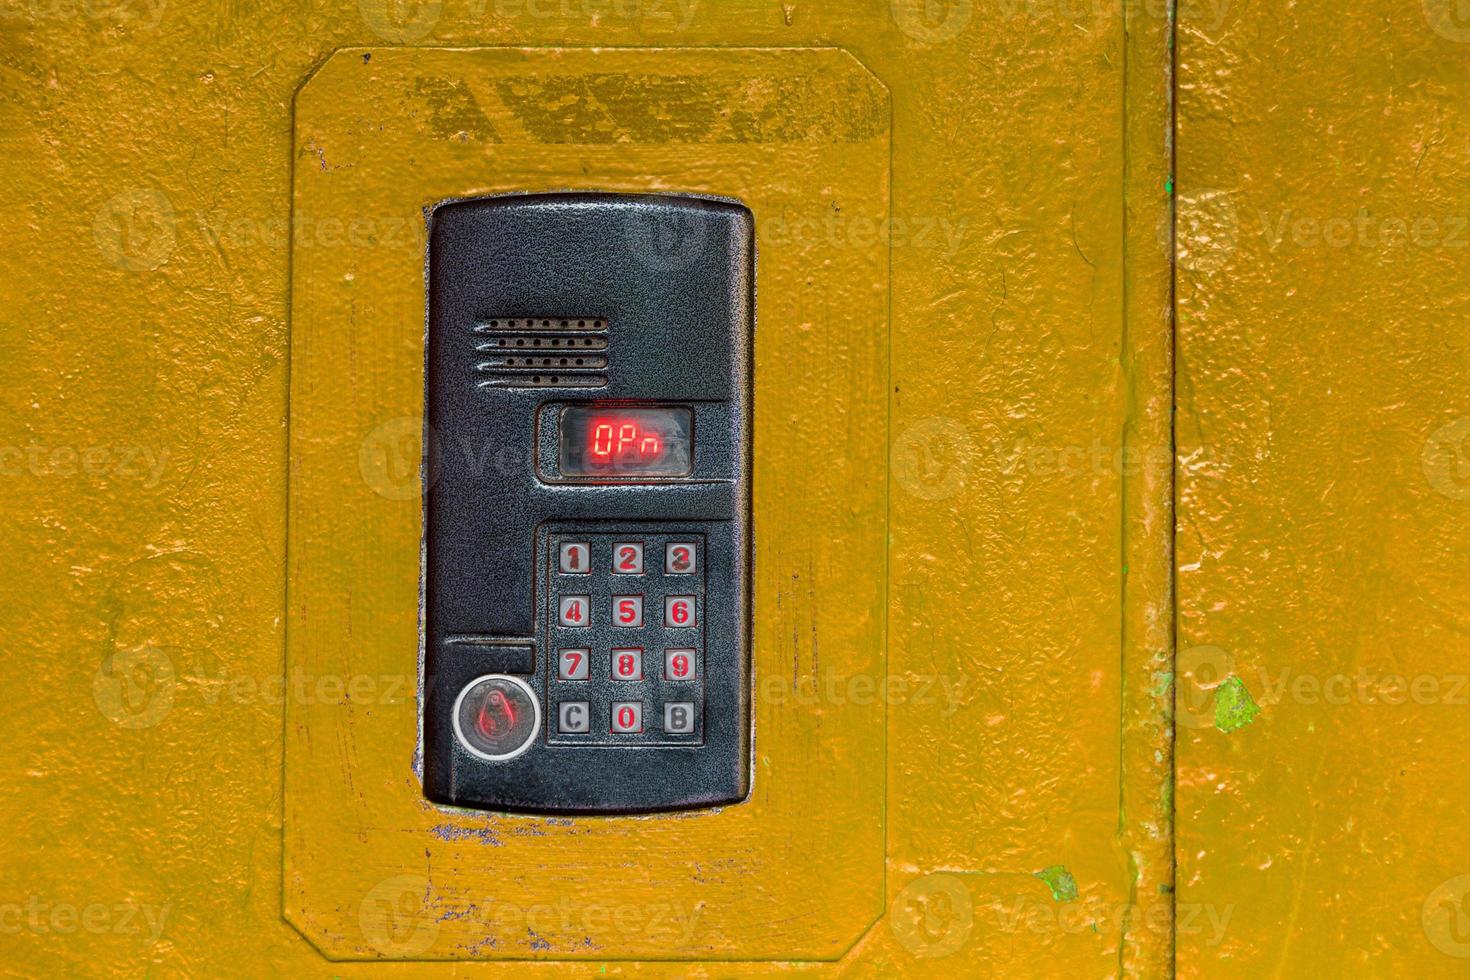 An intercom on old painted yellow steel surface with a keypad, digital display and rfid sensor for calling close-up photo